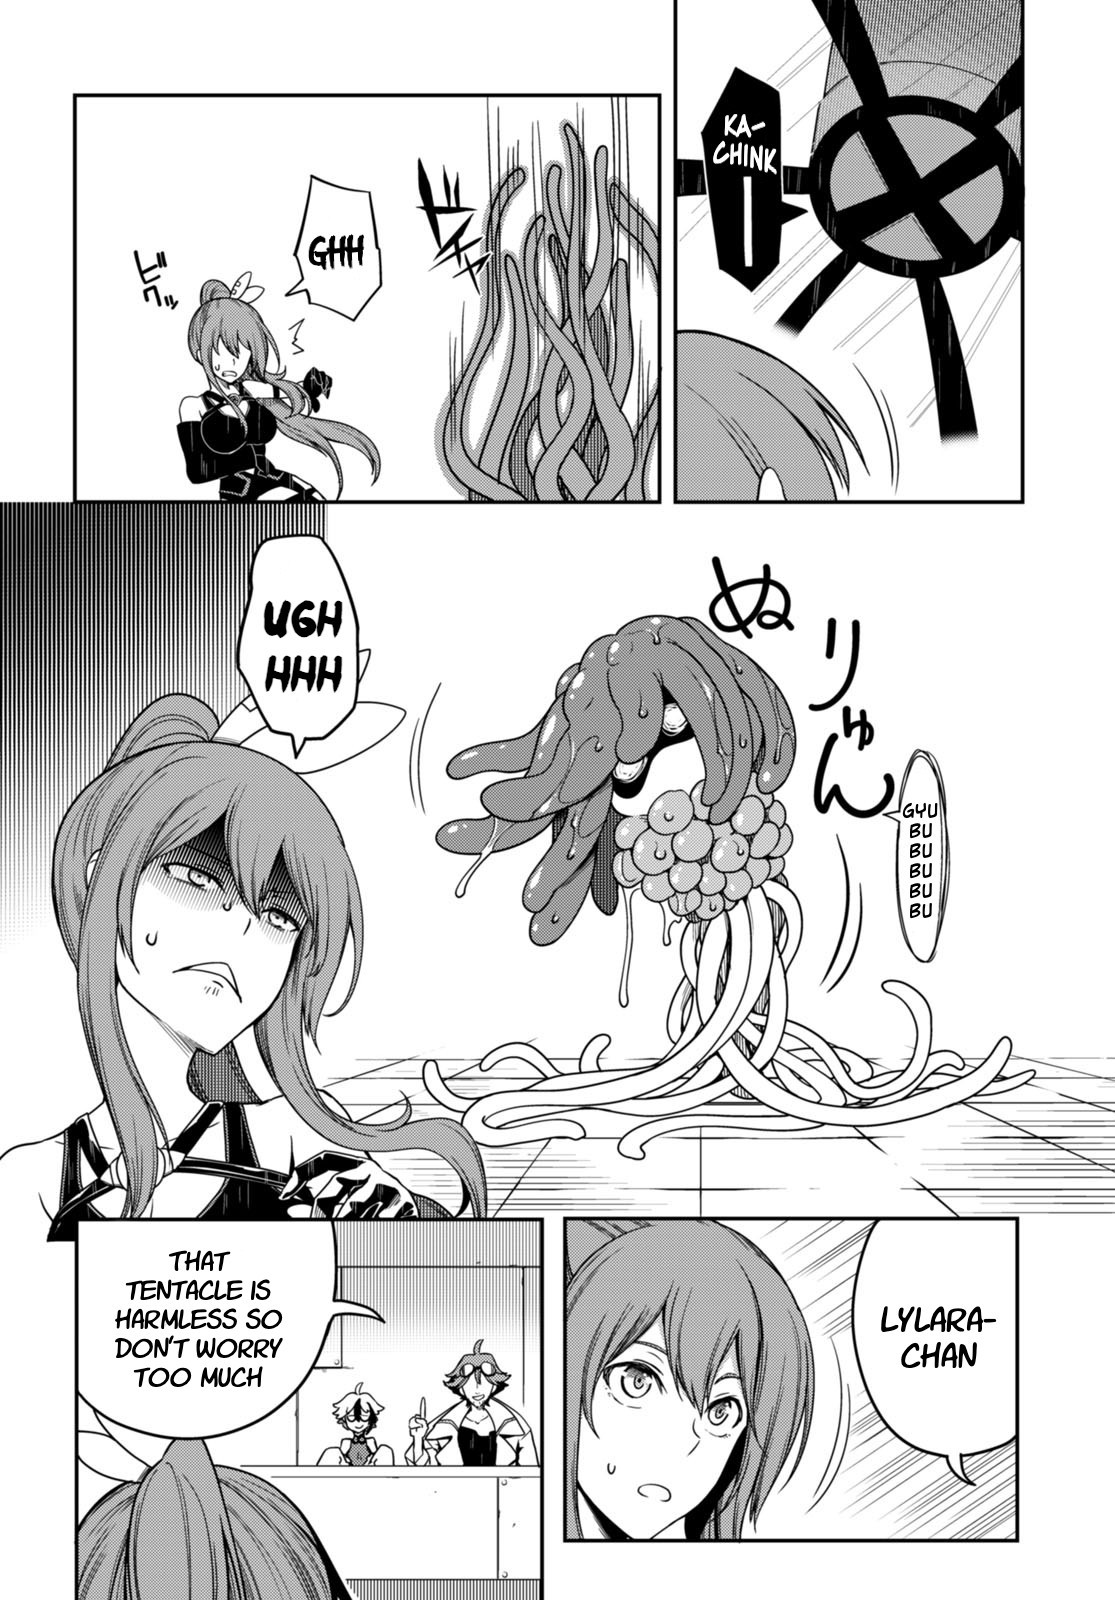 Tentacle Hole Vol.3 Chapter 12.5: Extra Chapter: Lylara's Tentacle Resistance Training - Picture 3